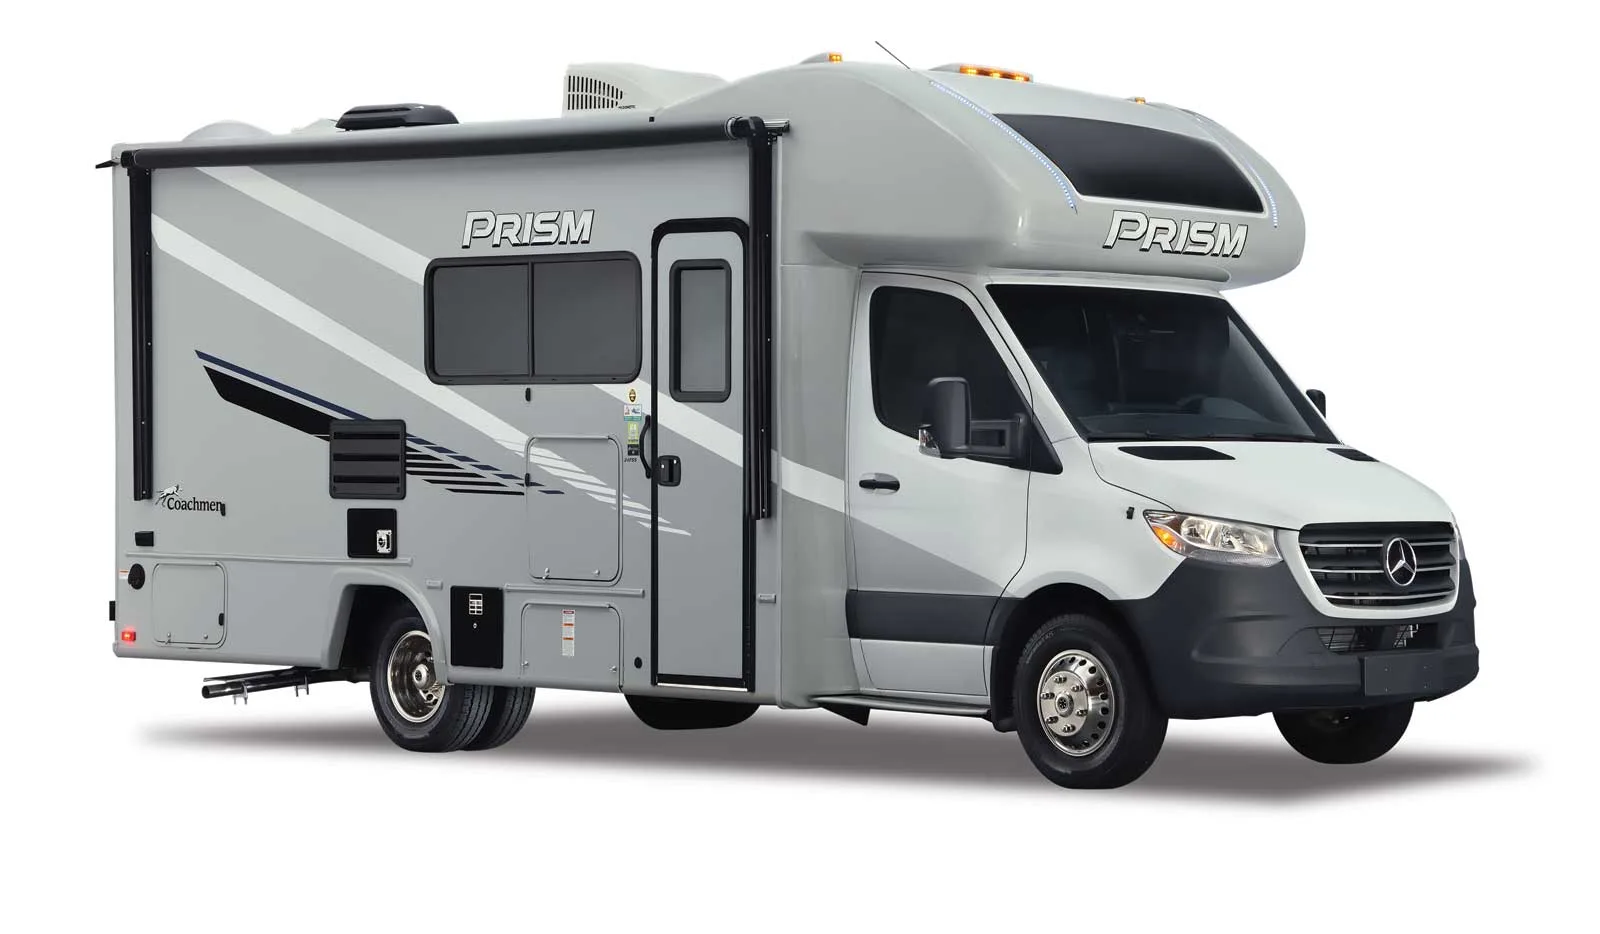 Exterior of the Prism Class C motorhome in a grey color.